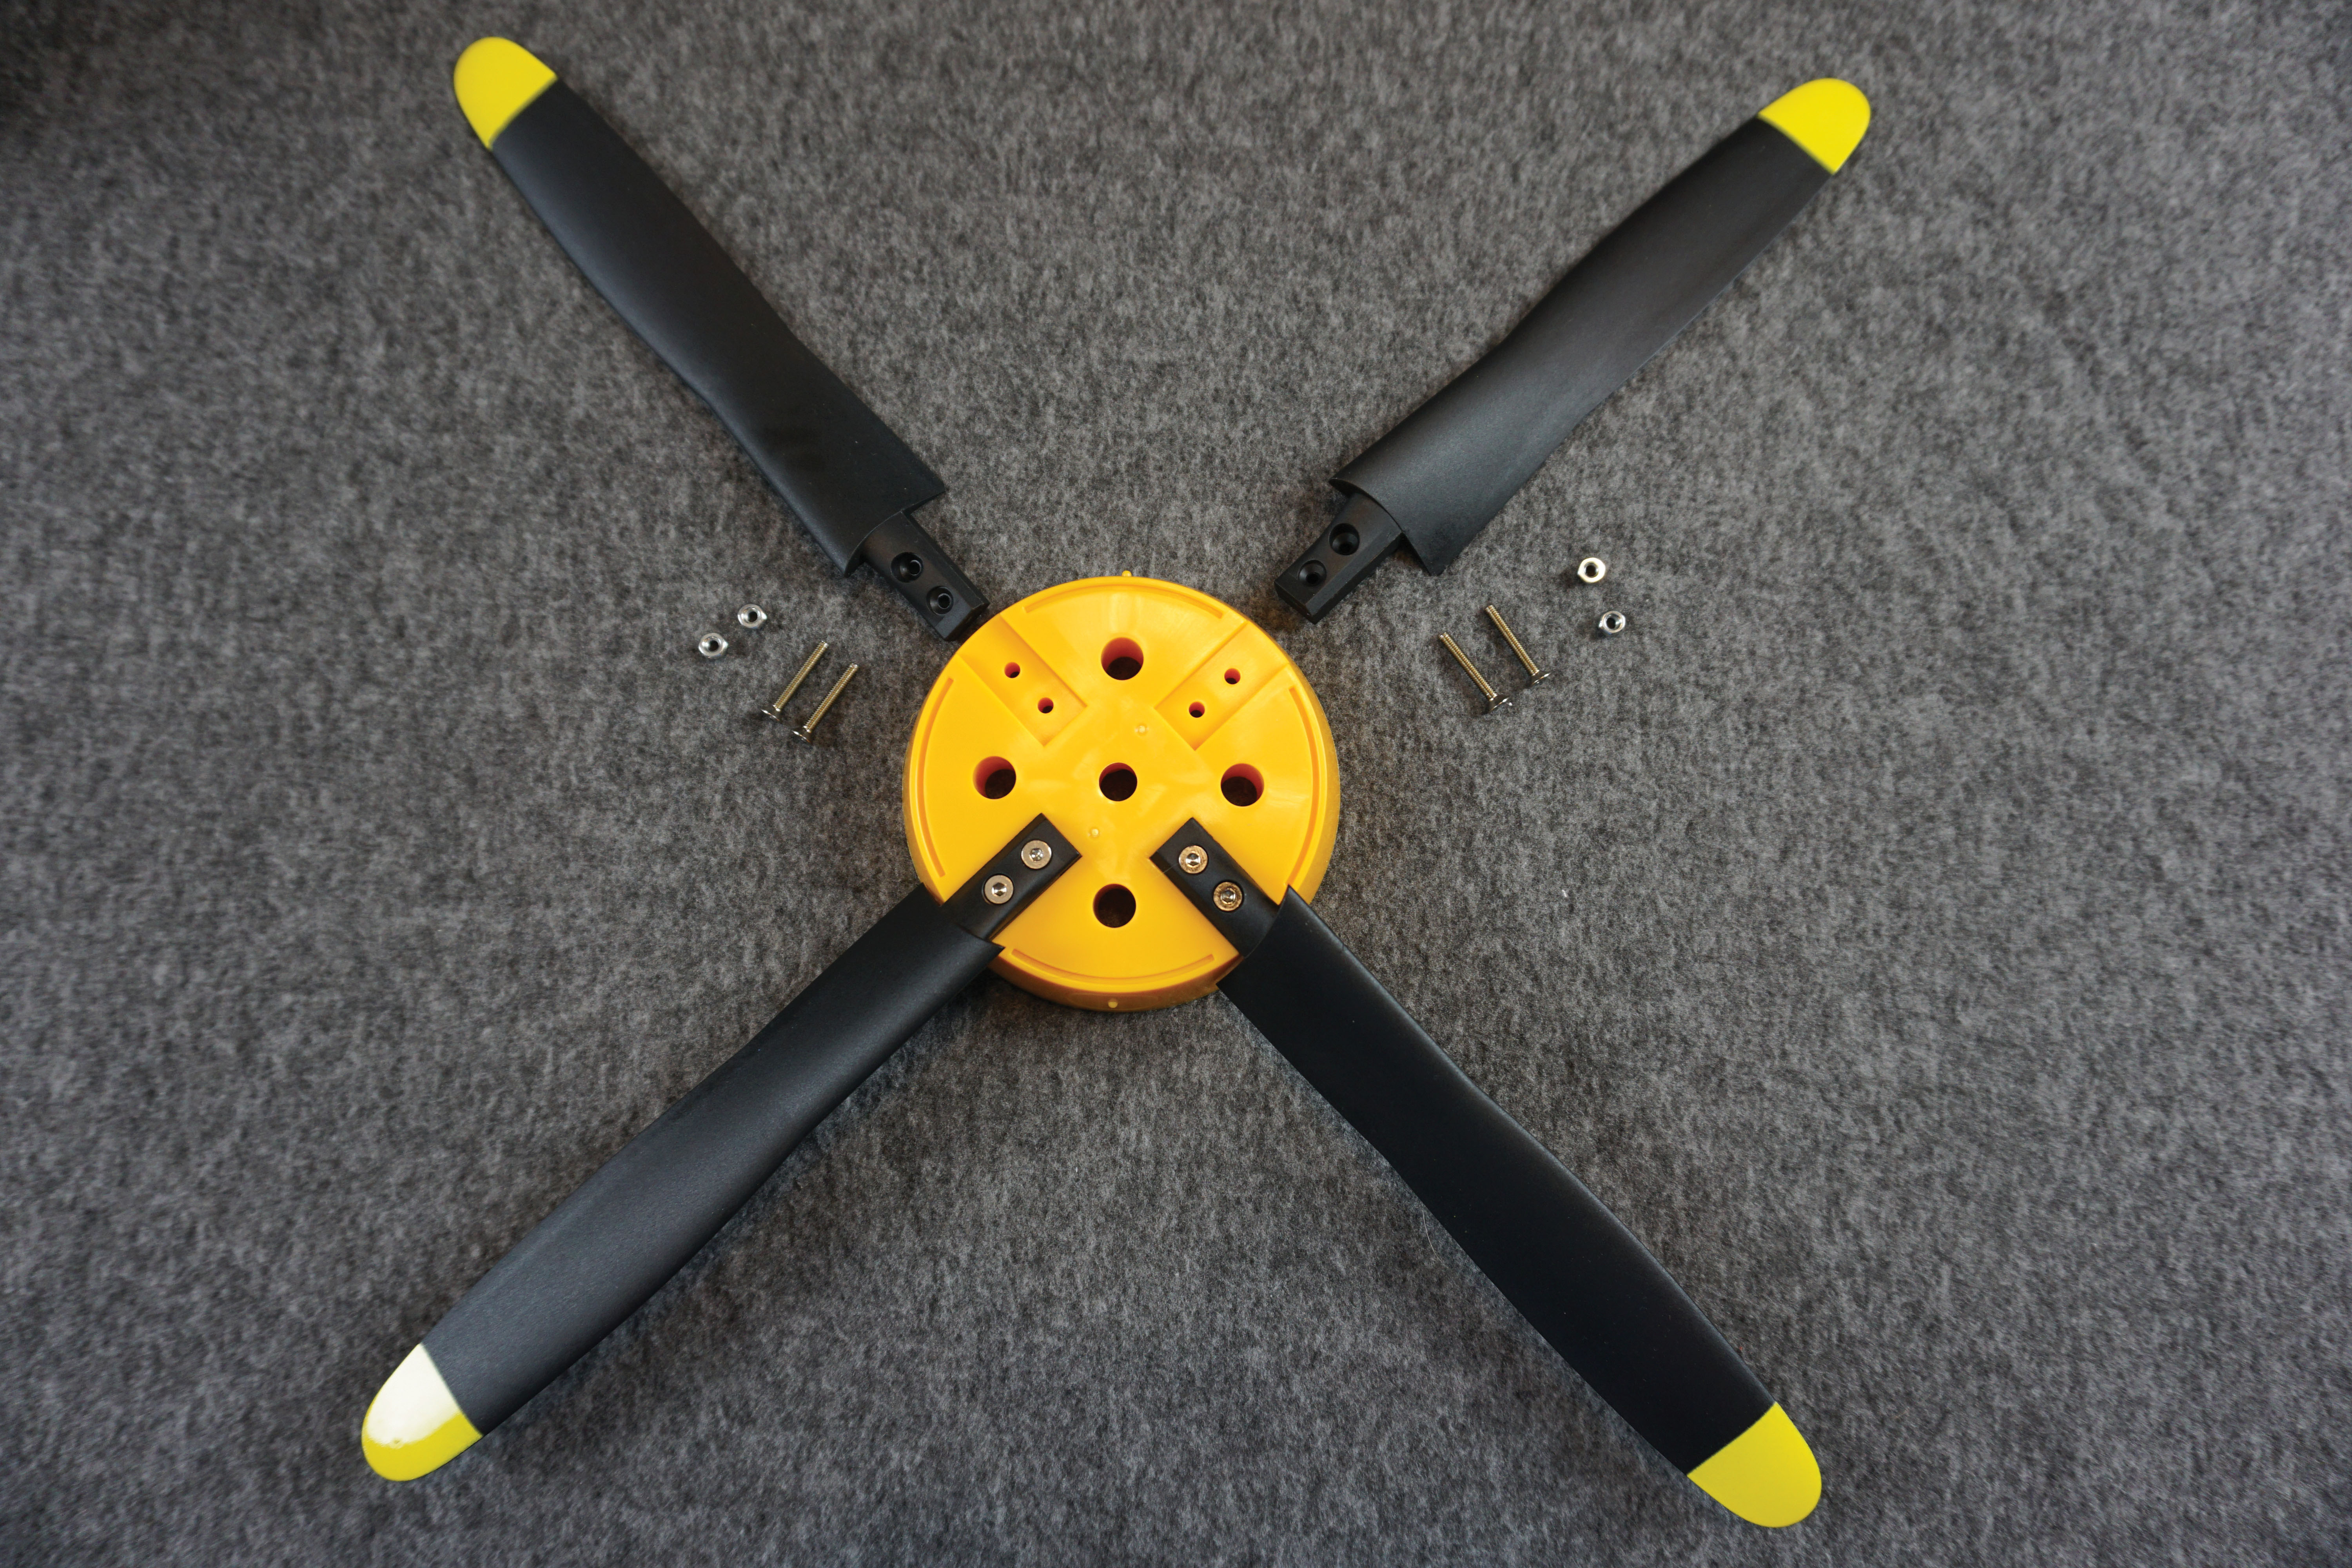 the semiscale four blade propeller requires only minor assembly